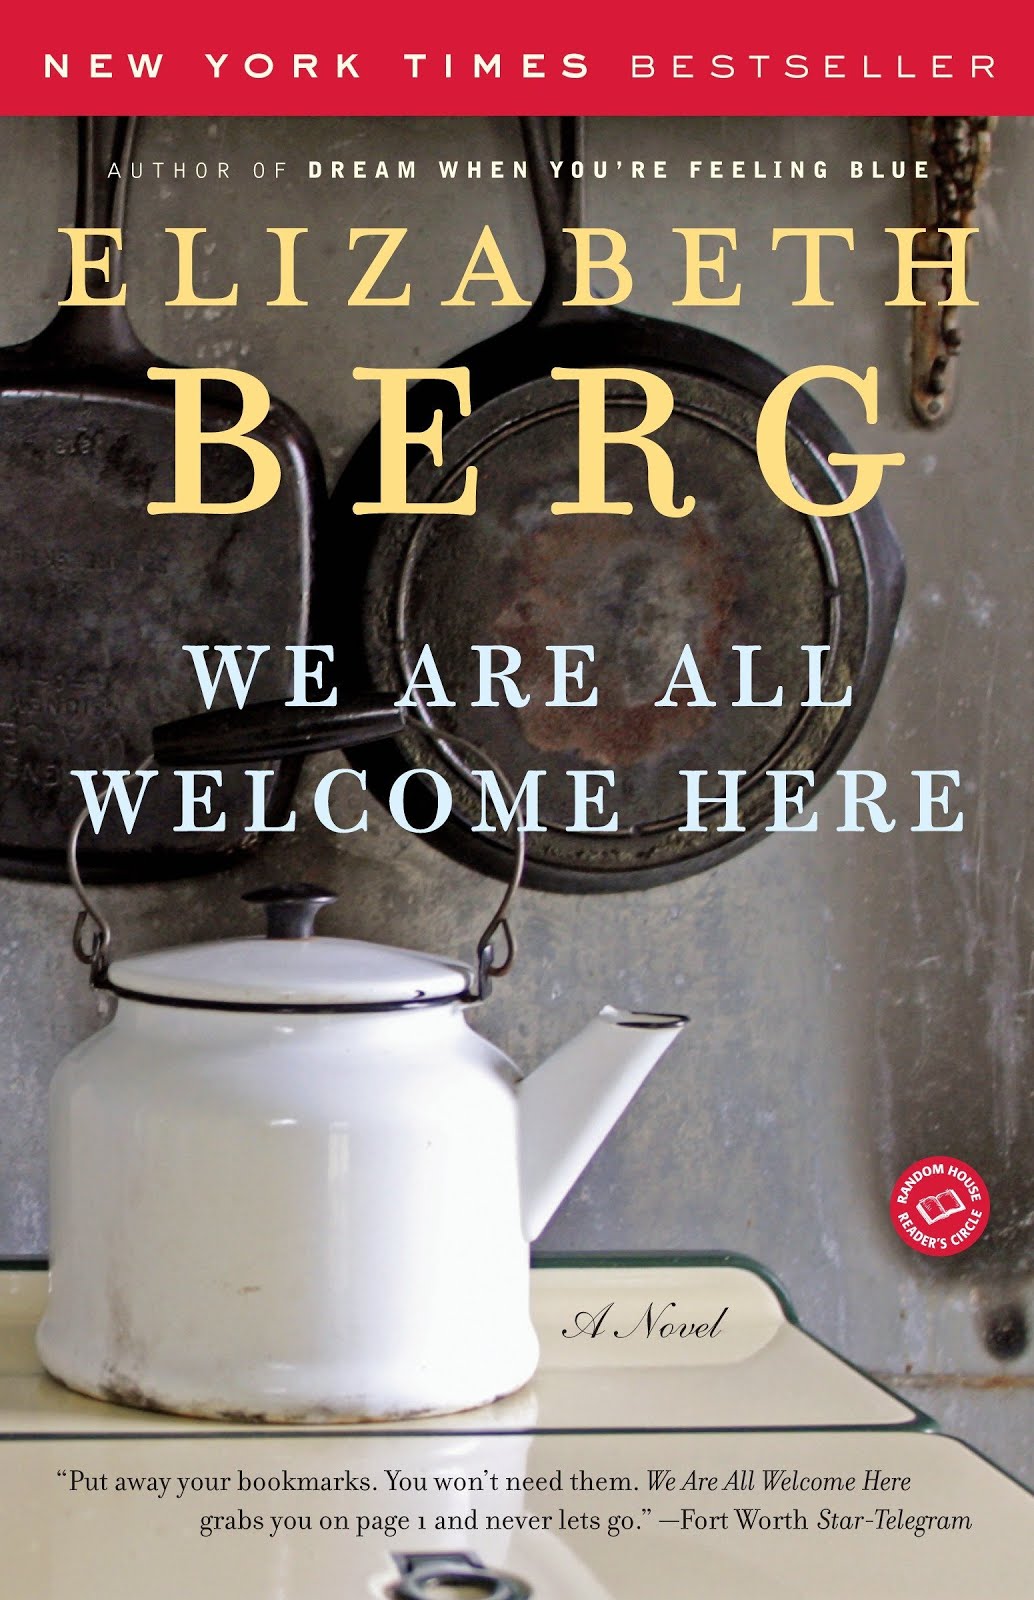 We Are All Welcome Here, a charming novel by Elizabeth Berg